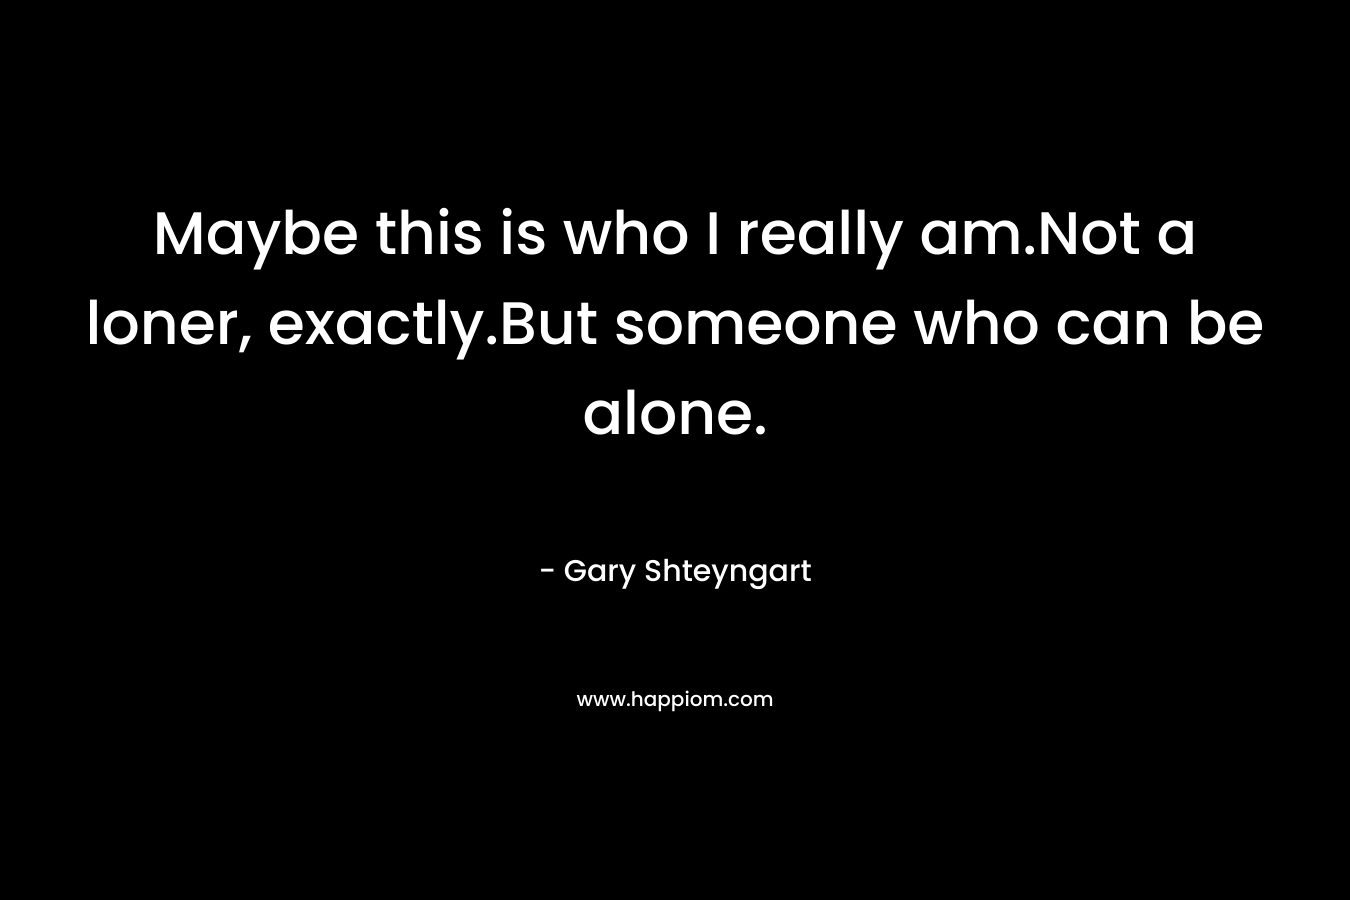 Maybe this is who I really am.Not a loner, exactly.But someone who can be alone. – Gary Shteyngart